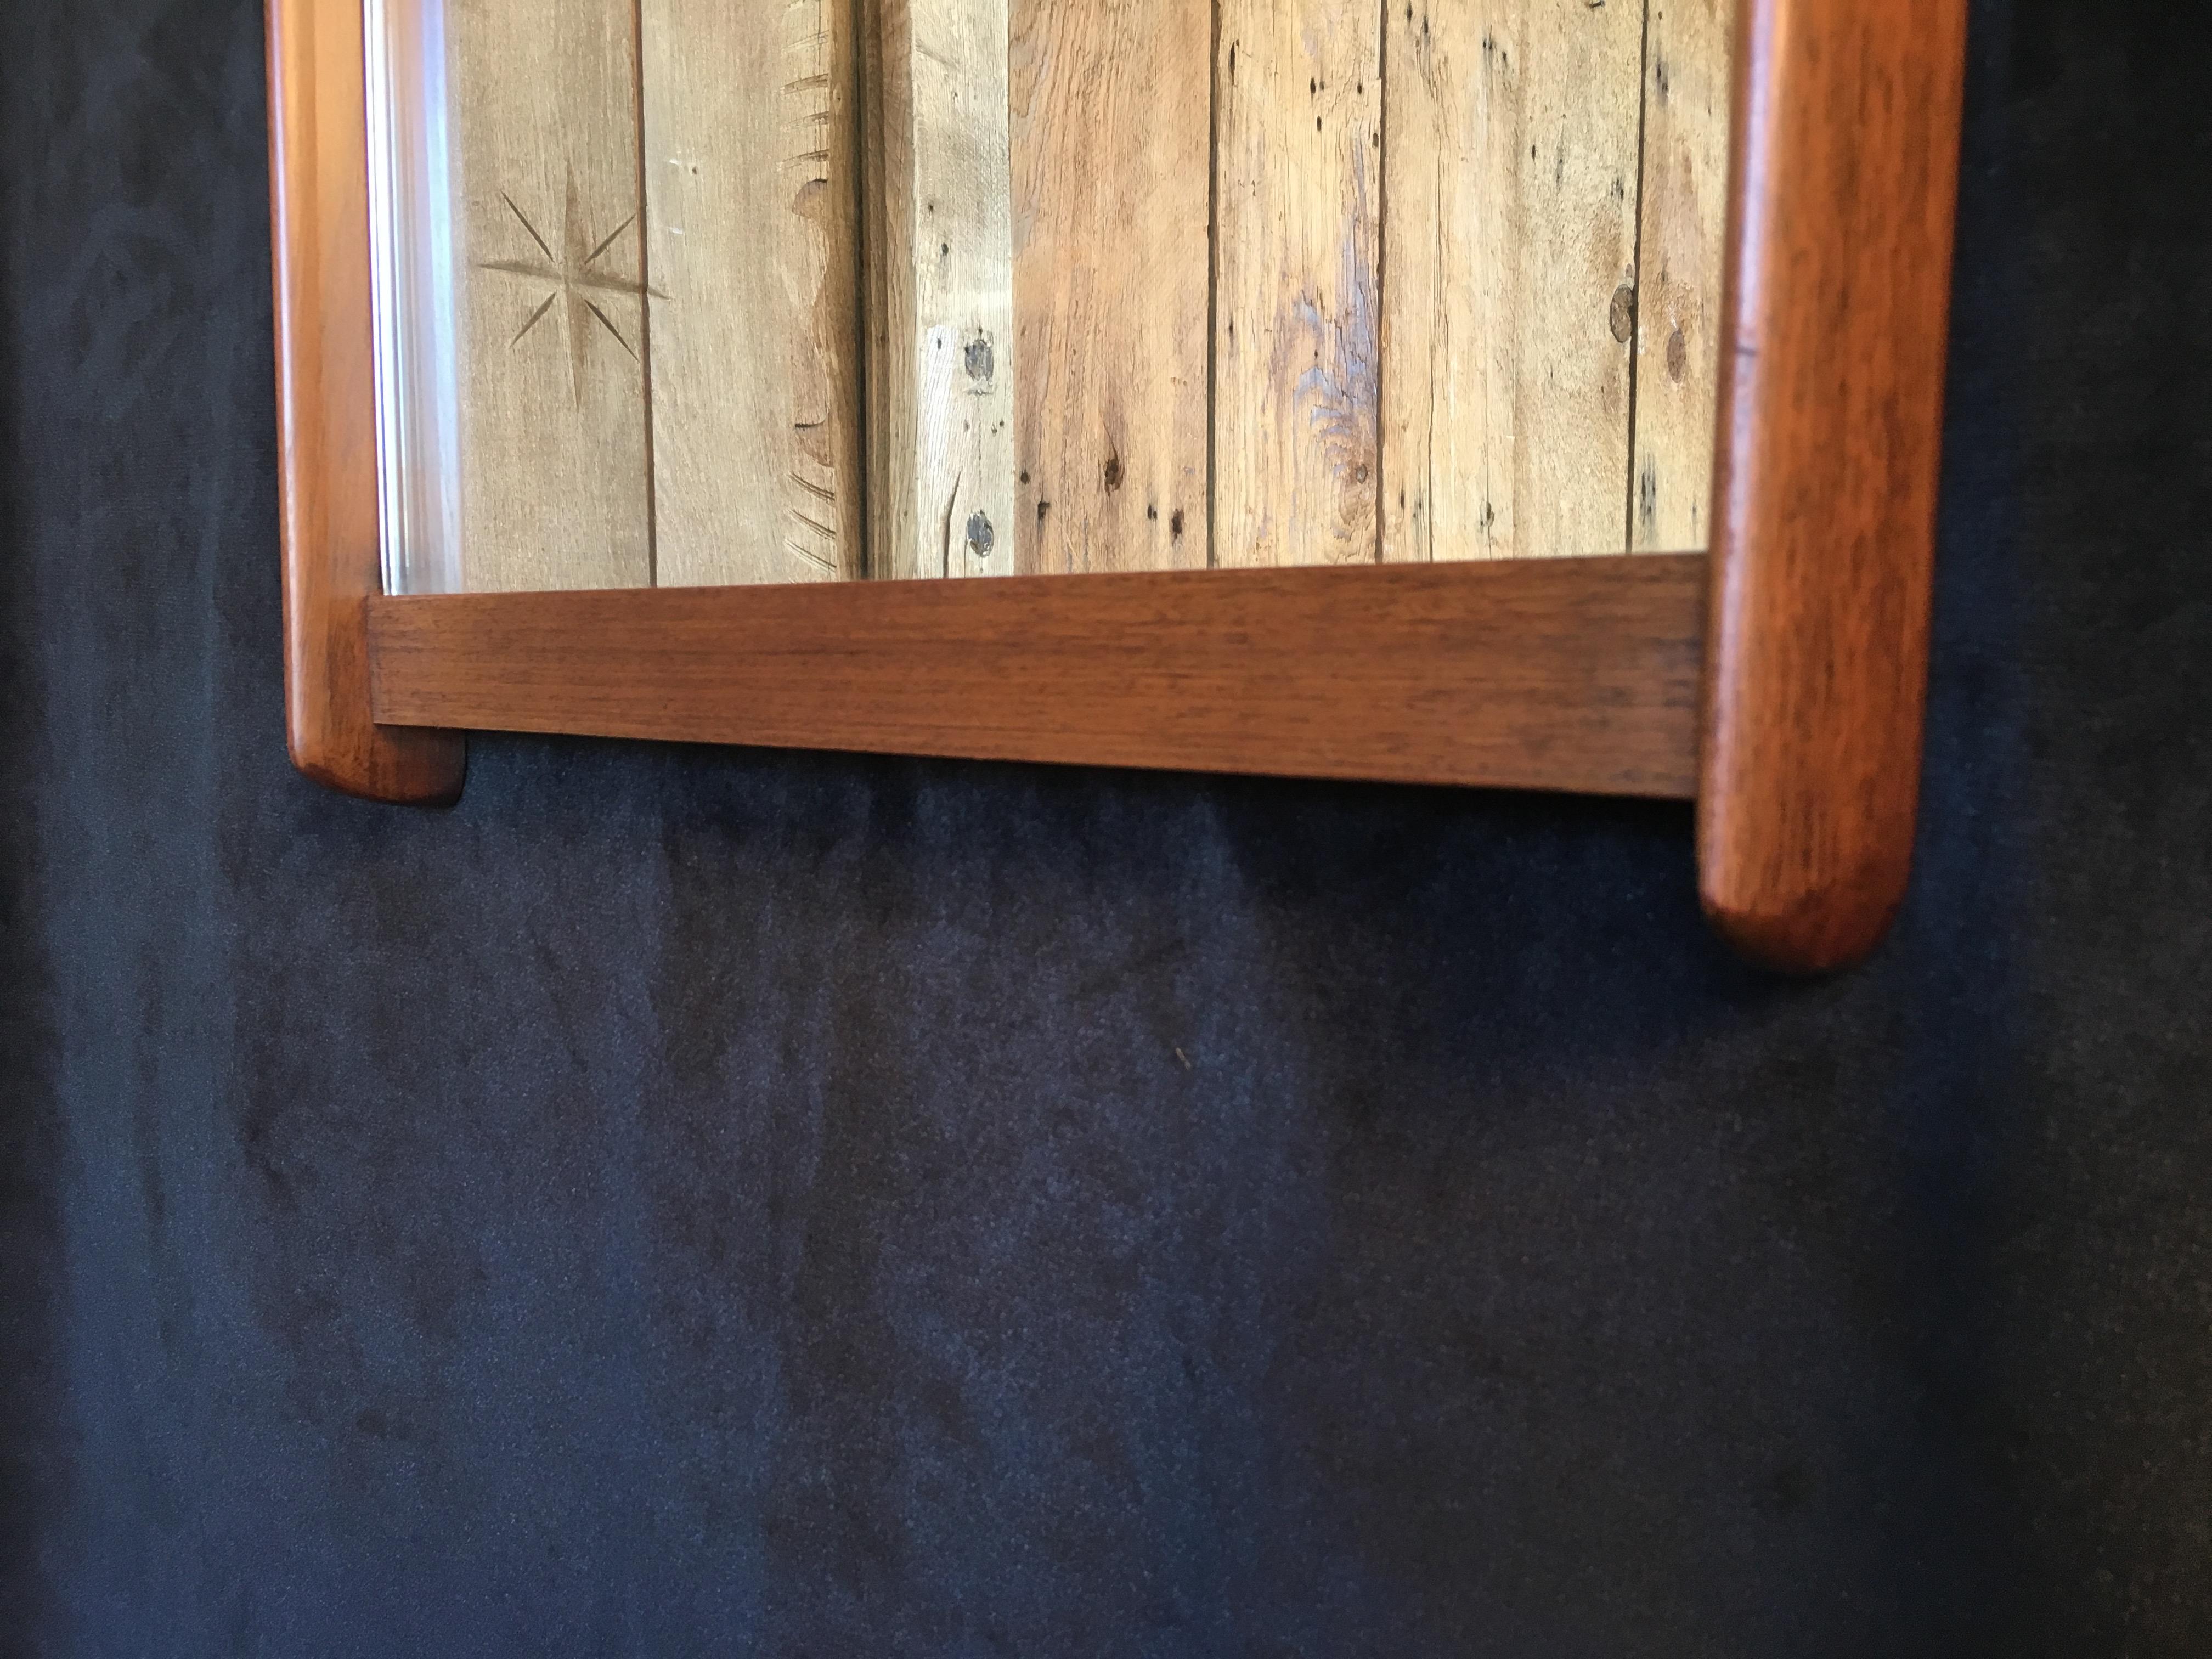 Nice size mirror flanked on each side and the bottom with solid walnut.